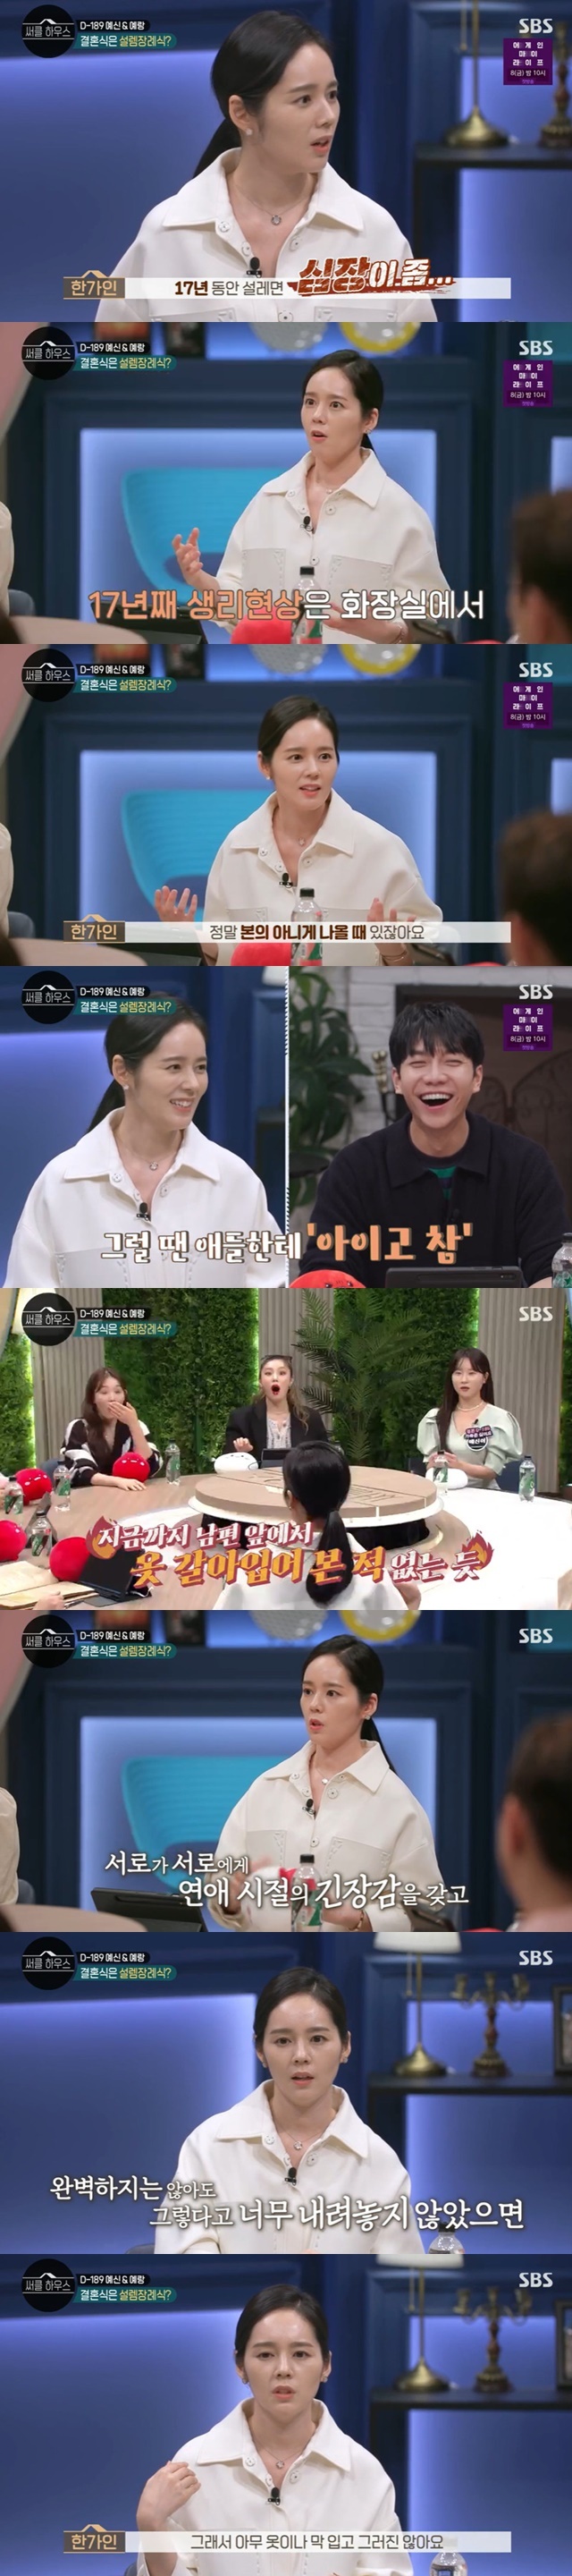 Han Ga-in said she keeps basic things like changing clothes and physiology with her husband Yeon Jung-hoon.Han Ga-in confessed that he would keep his husband Yeon Jung-hoon and his keep in the SBS Youth Counseling Project Circle House, which was broadcast on March 31st.On this day, a couple of young couples appeared in the show, and they were worried that the excitement would disappear after marriage.Yerang Yesin is a couple who meet with a guest and a hair designer and is about to marriage after three years of love.Yesin said that he met Yerang and thought about marriage for the first time. He said that Yerang had raised a romance for marriage by asking What kind of marriage type do you want to do?Yesin wanted a brilliant marriage ceremony, but Han Ga-in said, Memories of marriage ceremony do not mean anything.Oh Eun Young also said, Ive been to marriage a lot. The bride is beautiful. I dont know what dress I wore or what I ate.If you live happily after the marriage ceremony, you will be reminded of the happy marriage ceremony. If you are unhappy, you will remember only the things that you had on the day of the marriage ceremony. When asked if Han Ga-in remained in the 17th year of marriage, Han Ga-in replied, If you are excited for 17 years, is not there a heart problem?Oh Eun Young said that the problem of farting between couples is also important, and Yerang and Yesin said they are careful.They are keeping the line to each other, such as using the hotel lobby toilet.When the signal comes, I make the TV sound loud and go into the bathroom and make the phone sound loud, Han Ga-in said. I sympathize. I dont fart. Never.When the signal comes, I run to the bathroom. Close the door. Sometimes it comes out unintentionally.I pretend not to be me, he said.Lee said, I can not fart in front of others because it is not polite.If you can not do it in front of others, it is not right to do it among your lovers. Lee Seung-gi said, I can fully understand that. If you are a lover, you can show others what you can not show.Lee also asked Yesin, Do you think you will love less if you are less beautiful? Yesin said, It is also severe to compare with other women.When Mother wakes up in the morning, she says, Will you be comfortable? Make up?I think its a big deal to say that women should try to keep their minds from changing, he admitted.